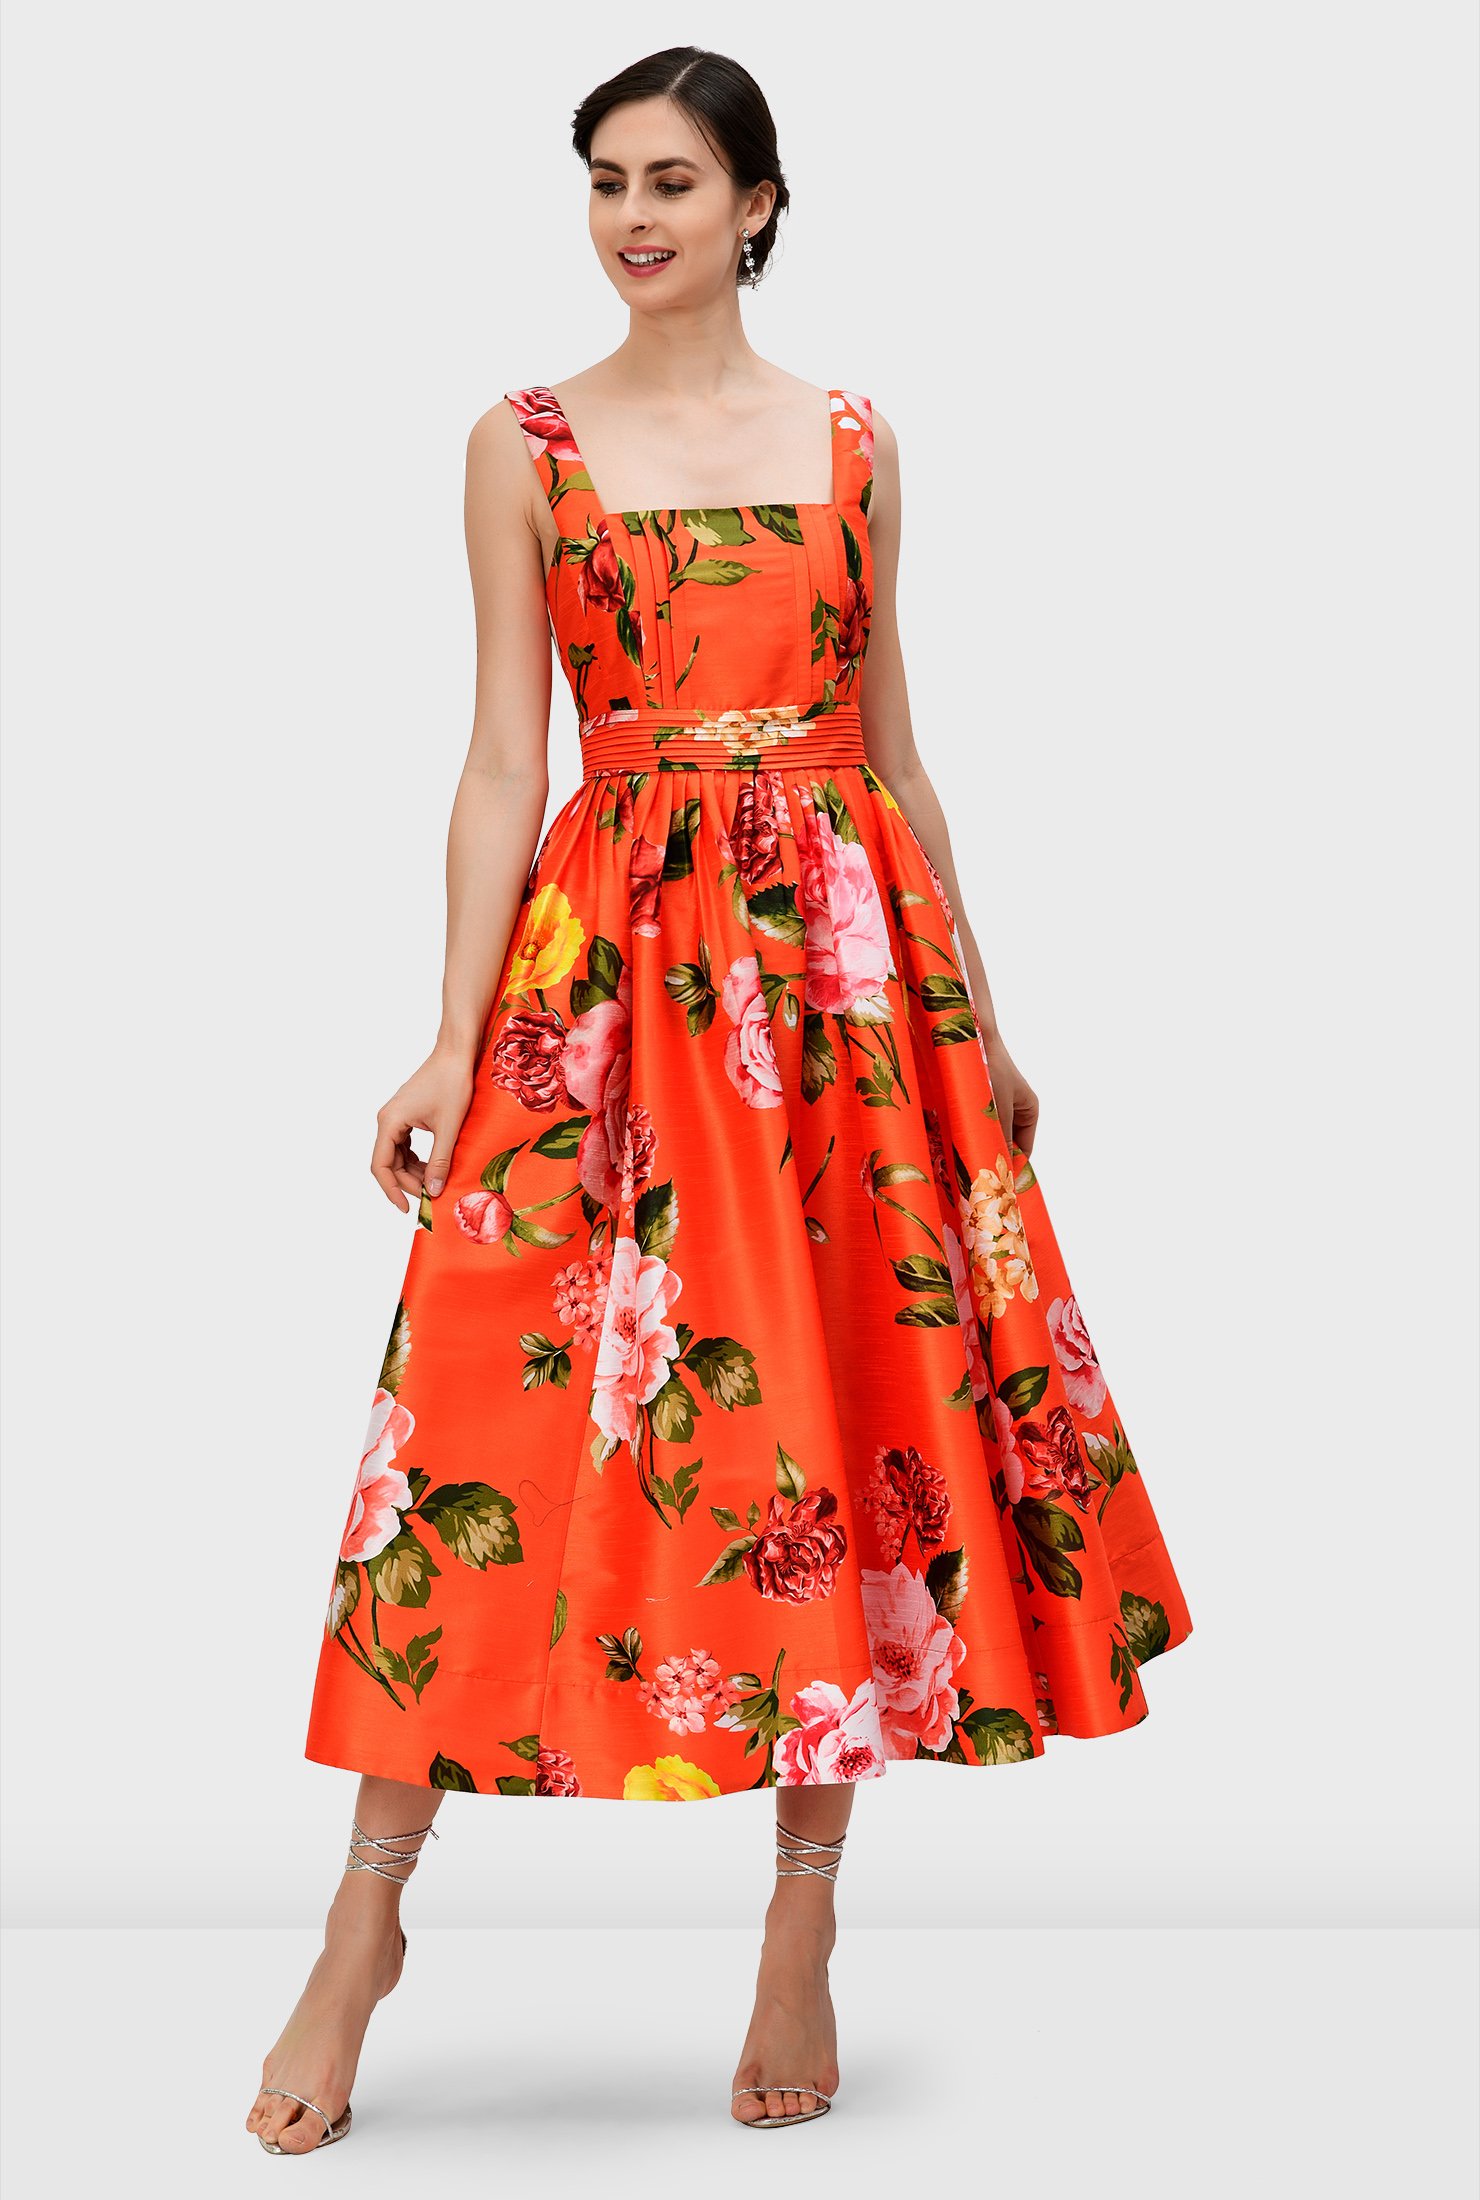 Over-blown bloom print patterns our polydupioni dress in a vibrant hue featuring a fitted bodice and knife pleat full skirt while a pleated waist cinches in the flattering silhouette.